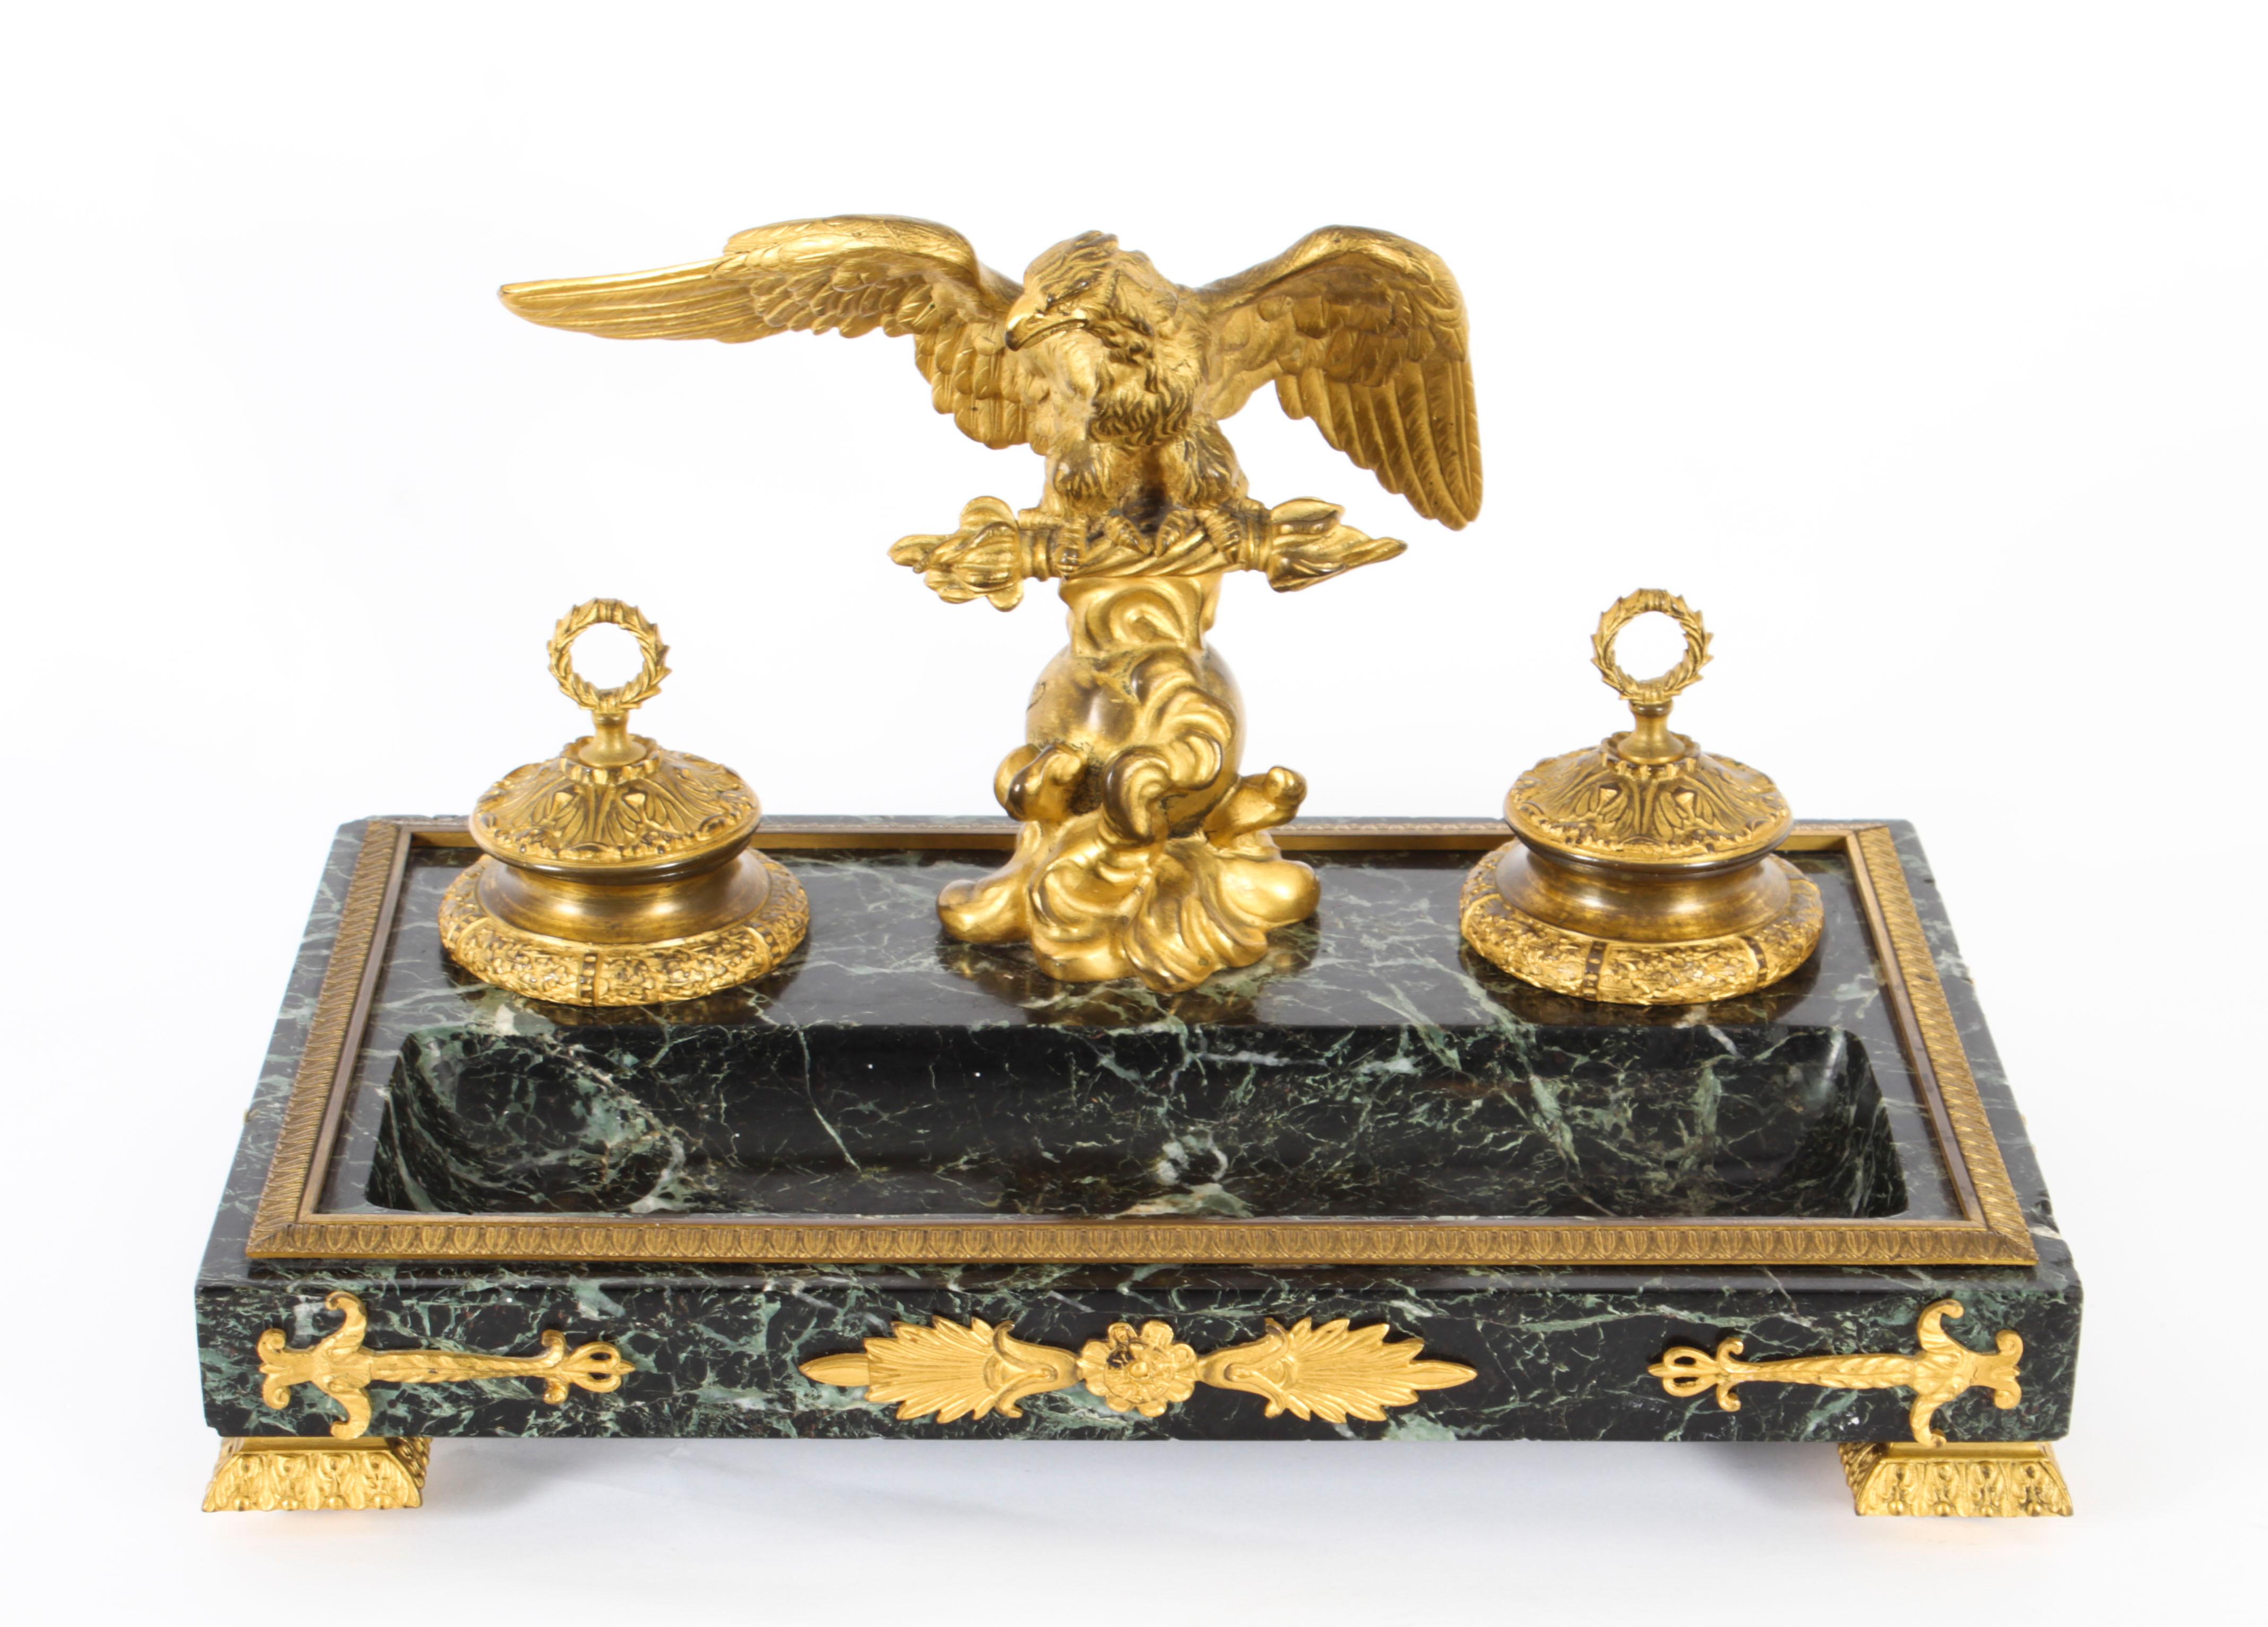 This is a wonderful antique French Empire Revival ormolu mounted and patinated Verde Antico marble inkstand, Circa 1870 in date.
 
Of rectangular form with a pair of raised inkwells with glass liners having ormolu covers, surmounted by a spread